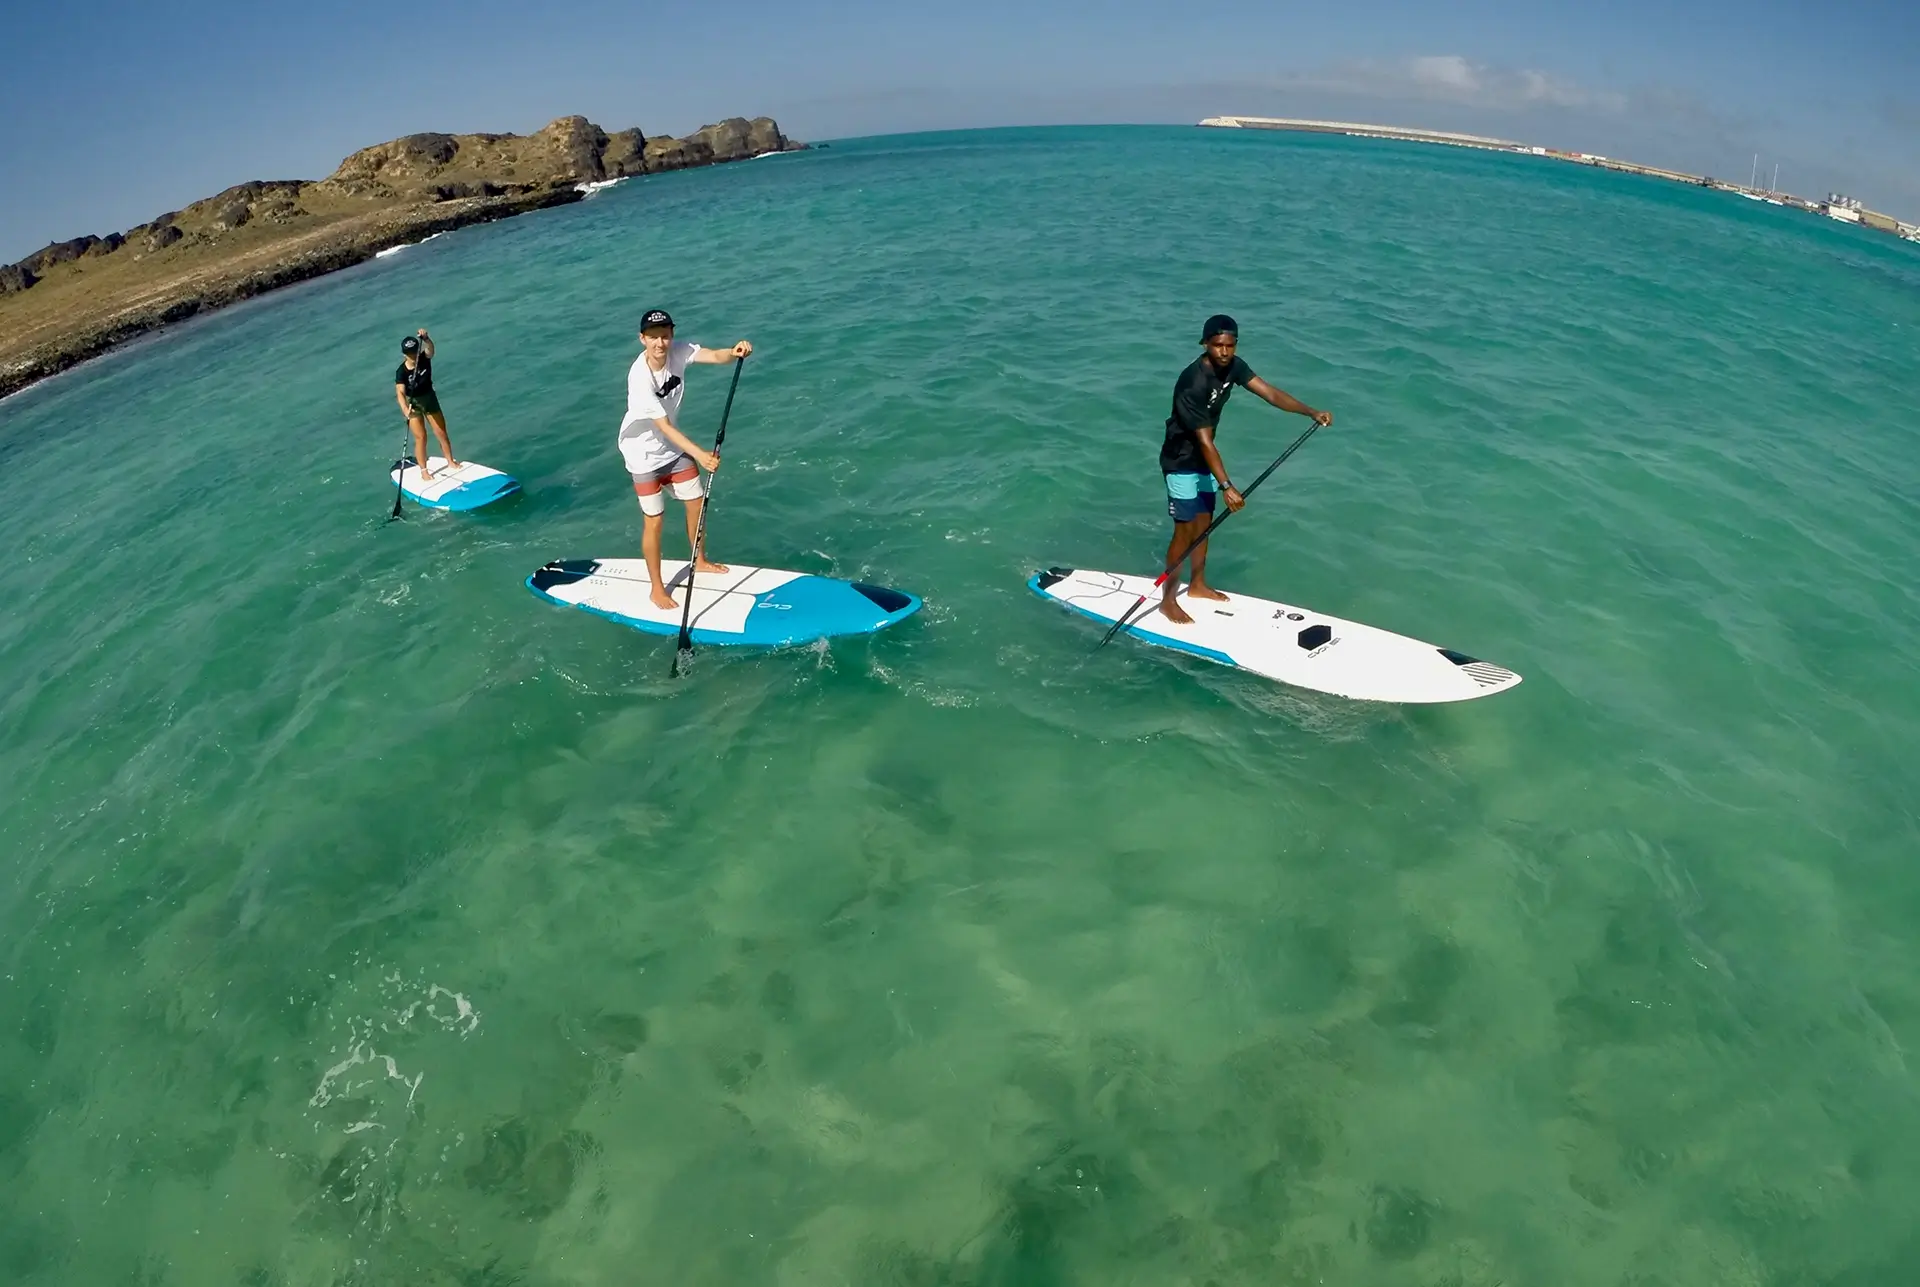 3 stand-up paddlers paddling through the sea